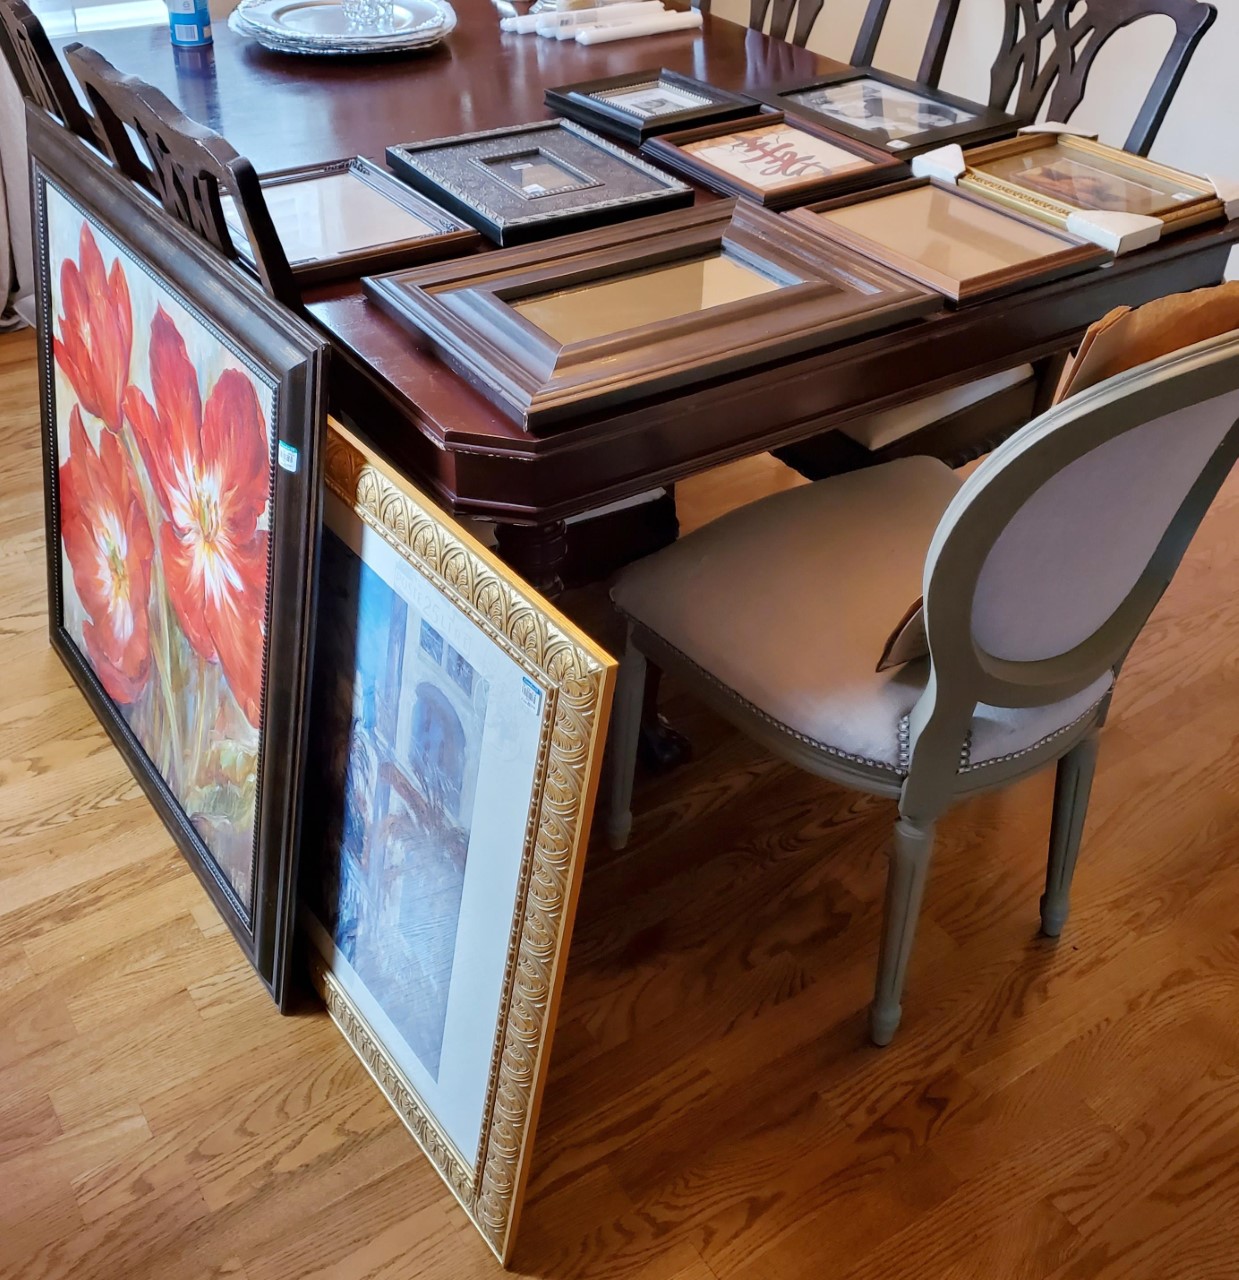 Collection of Goodwill frames for cheap.